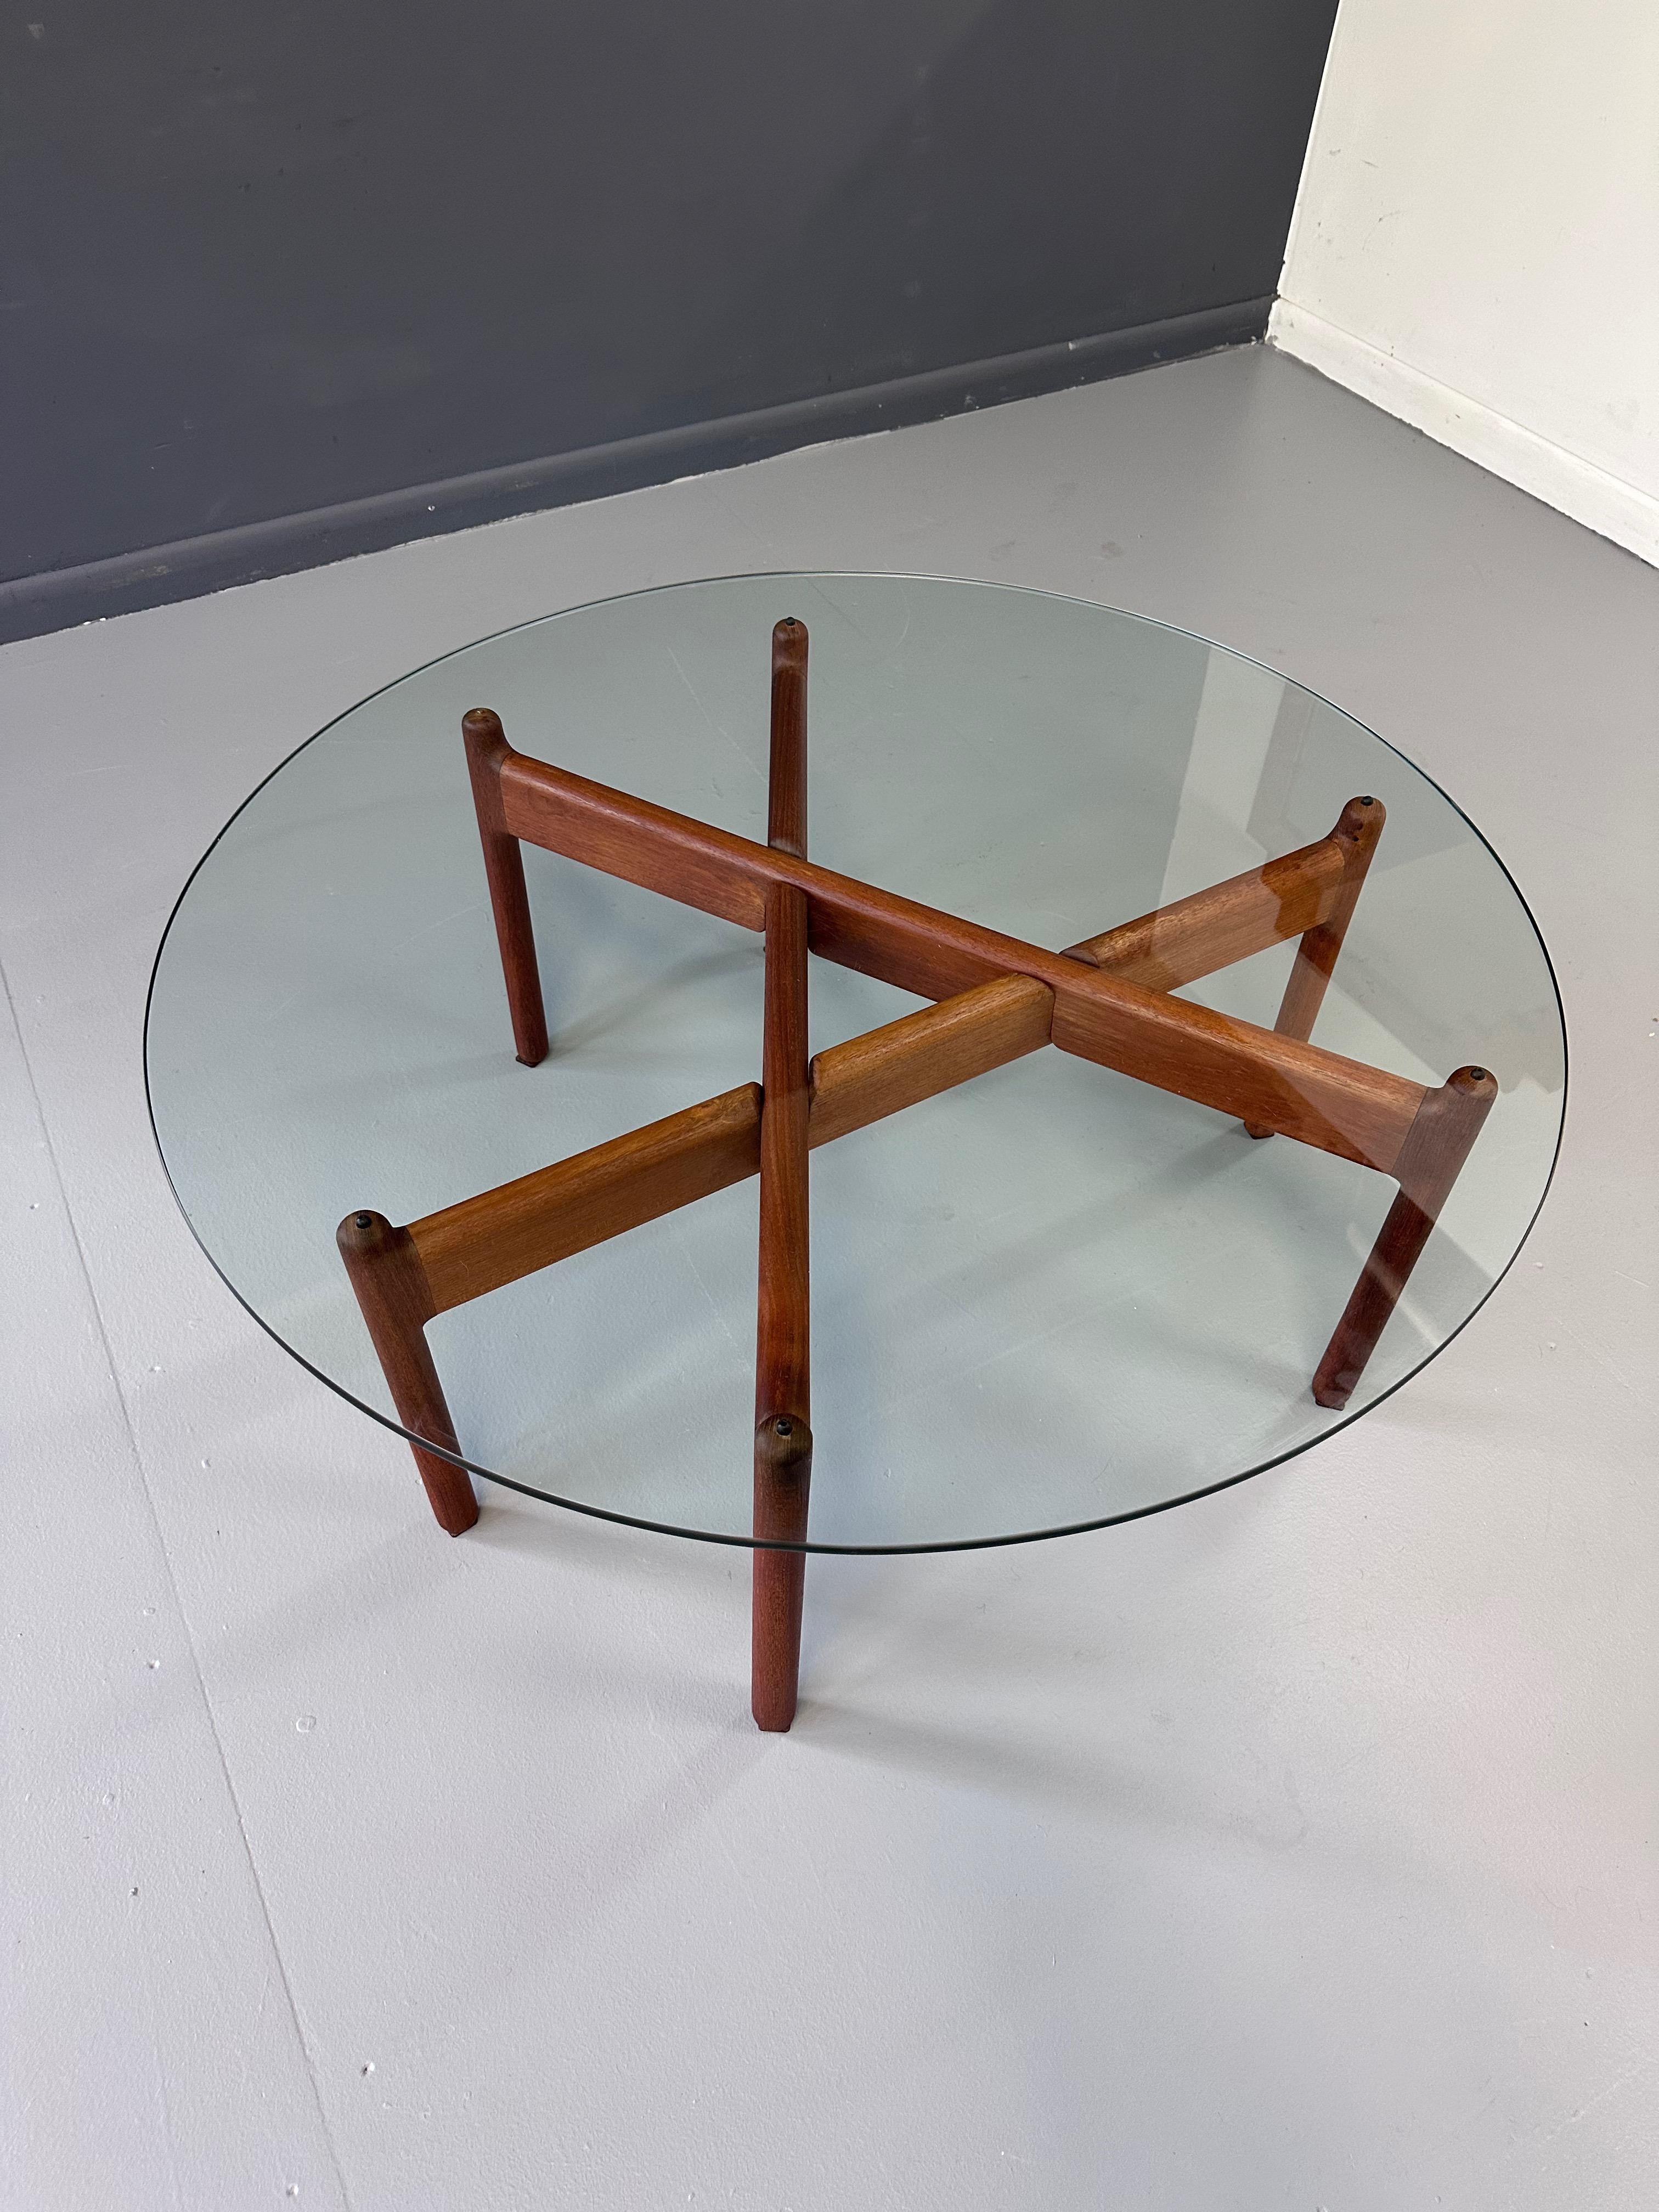 Niels Bach Coffee/Cocktail Table in Teak Denmark 1960 Midcentury In Good Condition For Sale In Philadelphia, PA